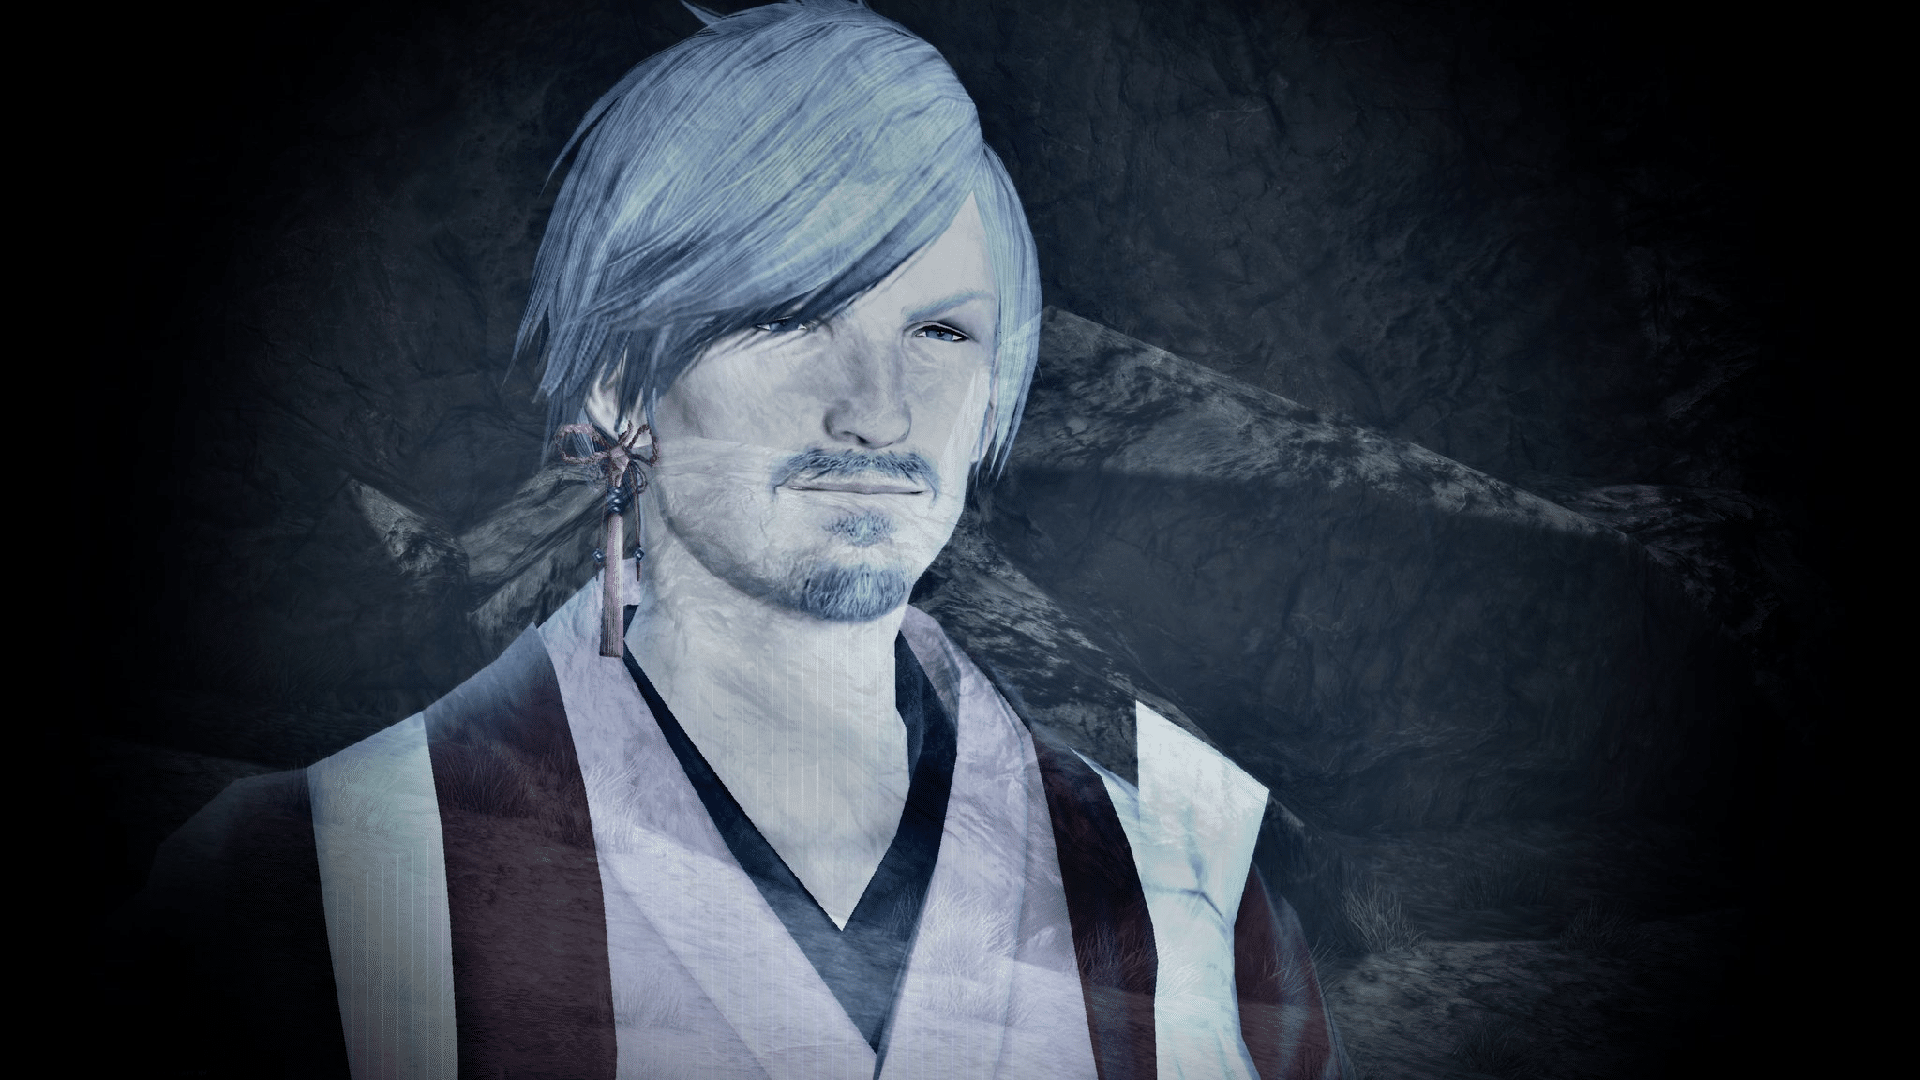 Hironobu Sakaguchi, the 'father of the Final Fantasy franchise' as he appears in the MMORPG, Final Fantasy XIV